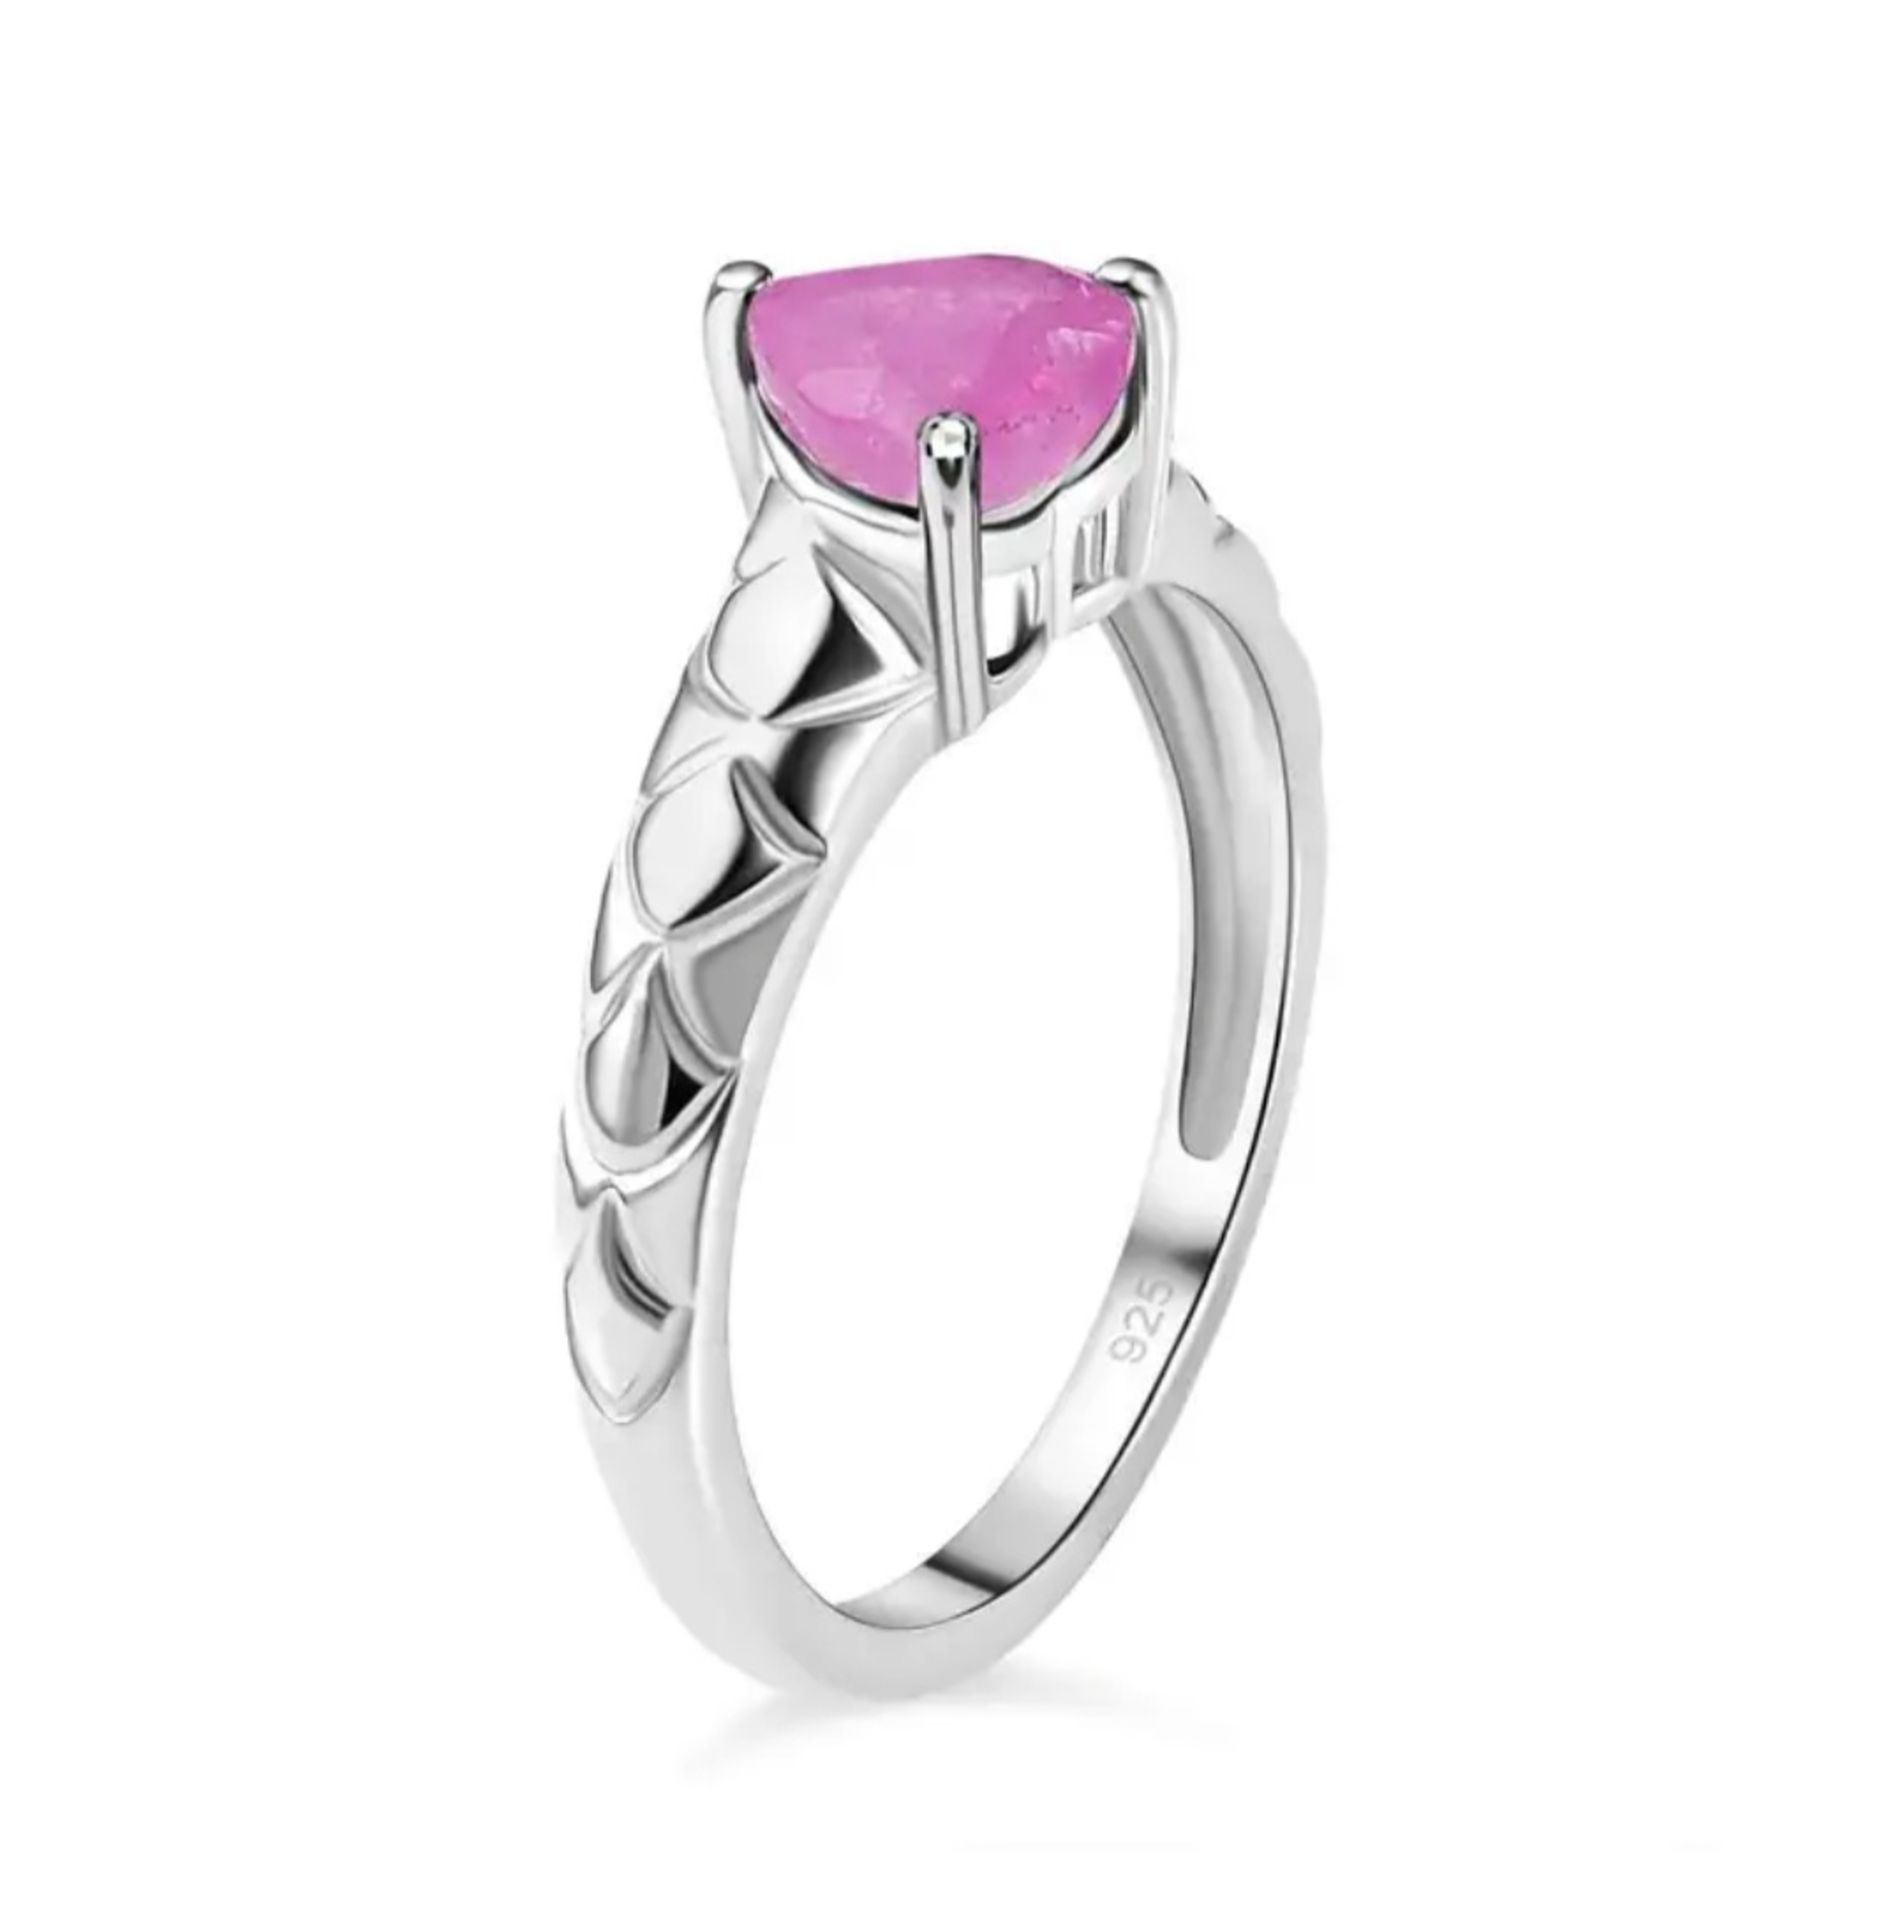 New! Pink Sapphire Heart Ring in Sterling Silver - Image 4 of 5